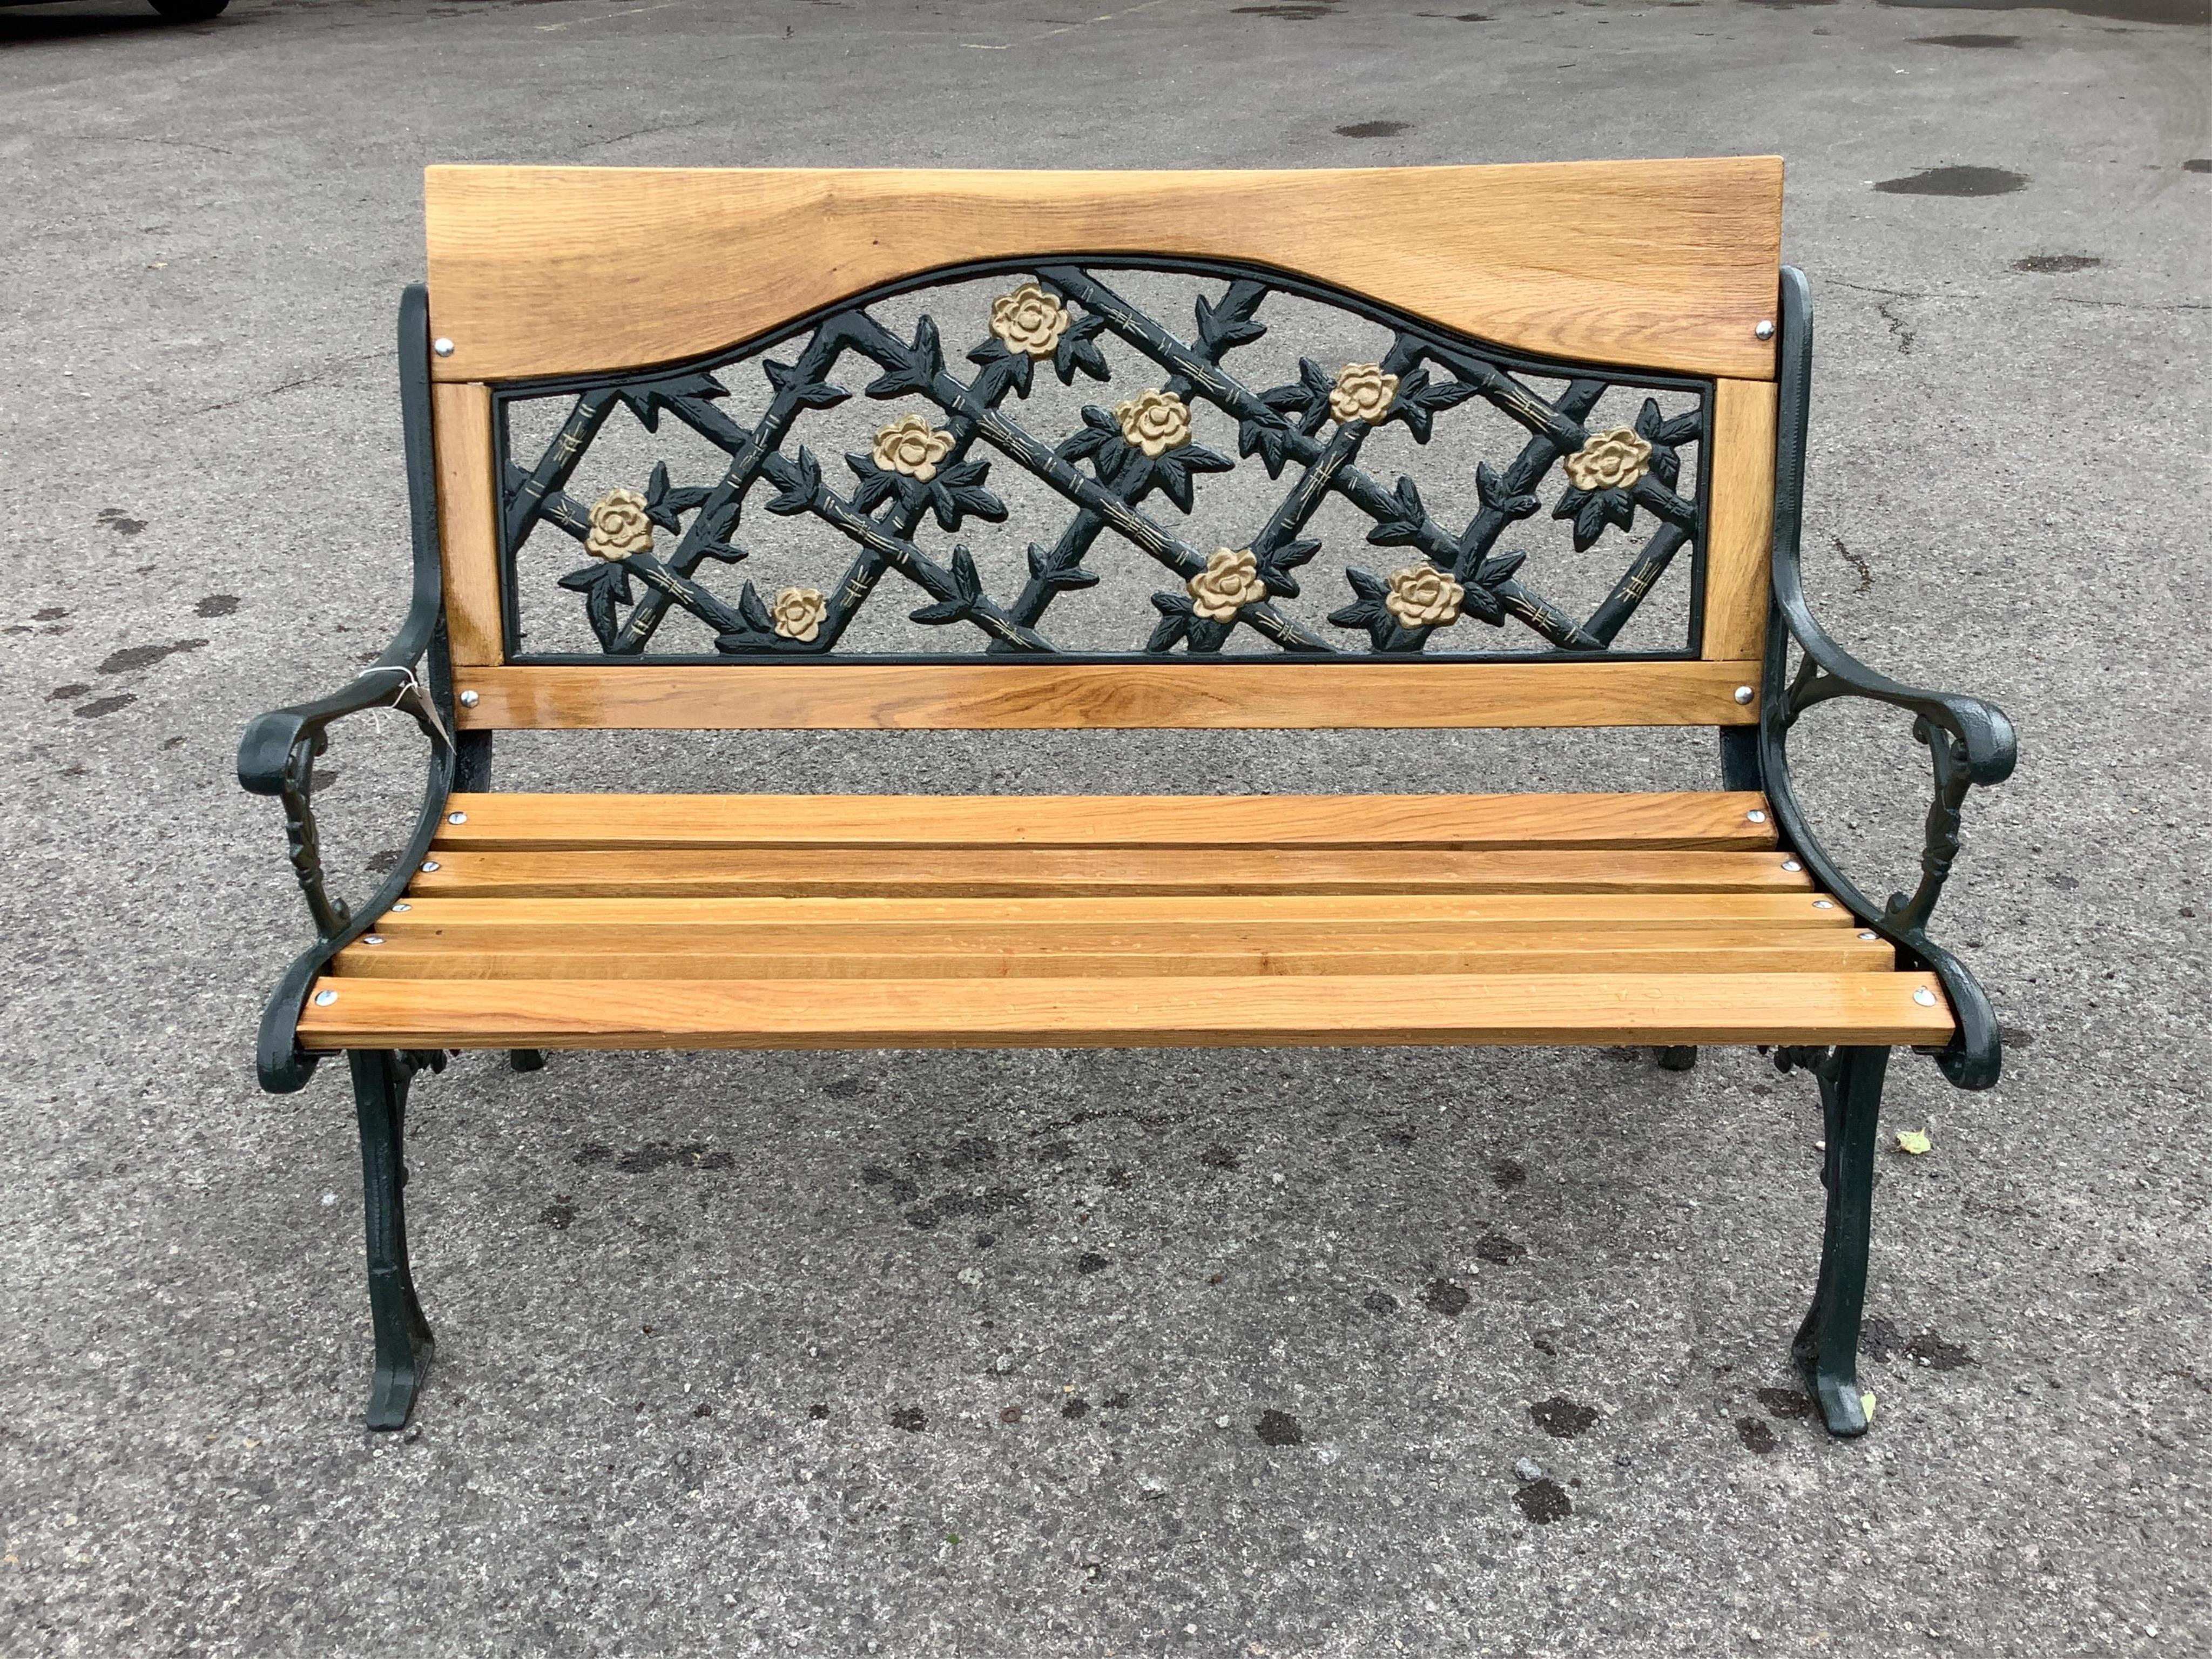 A Victorian style cast metal and slatted wood garden bench, width 130cm, height 90cm. Condition - good